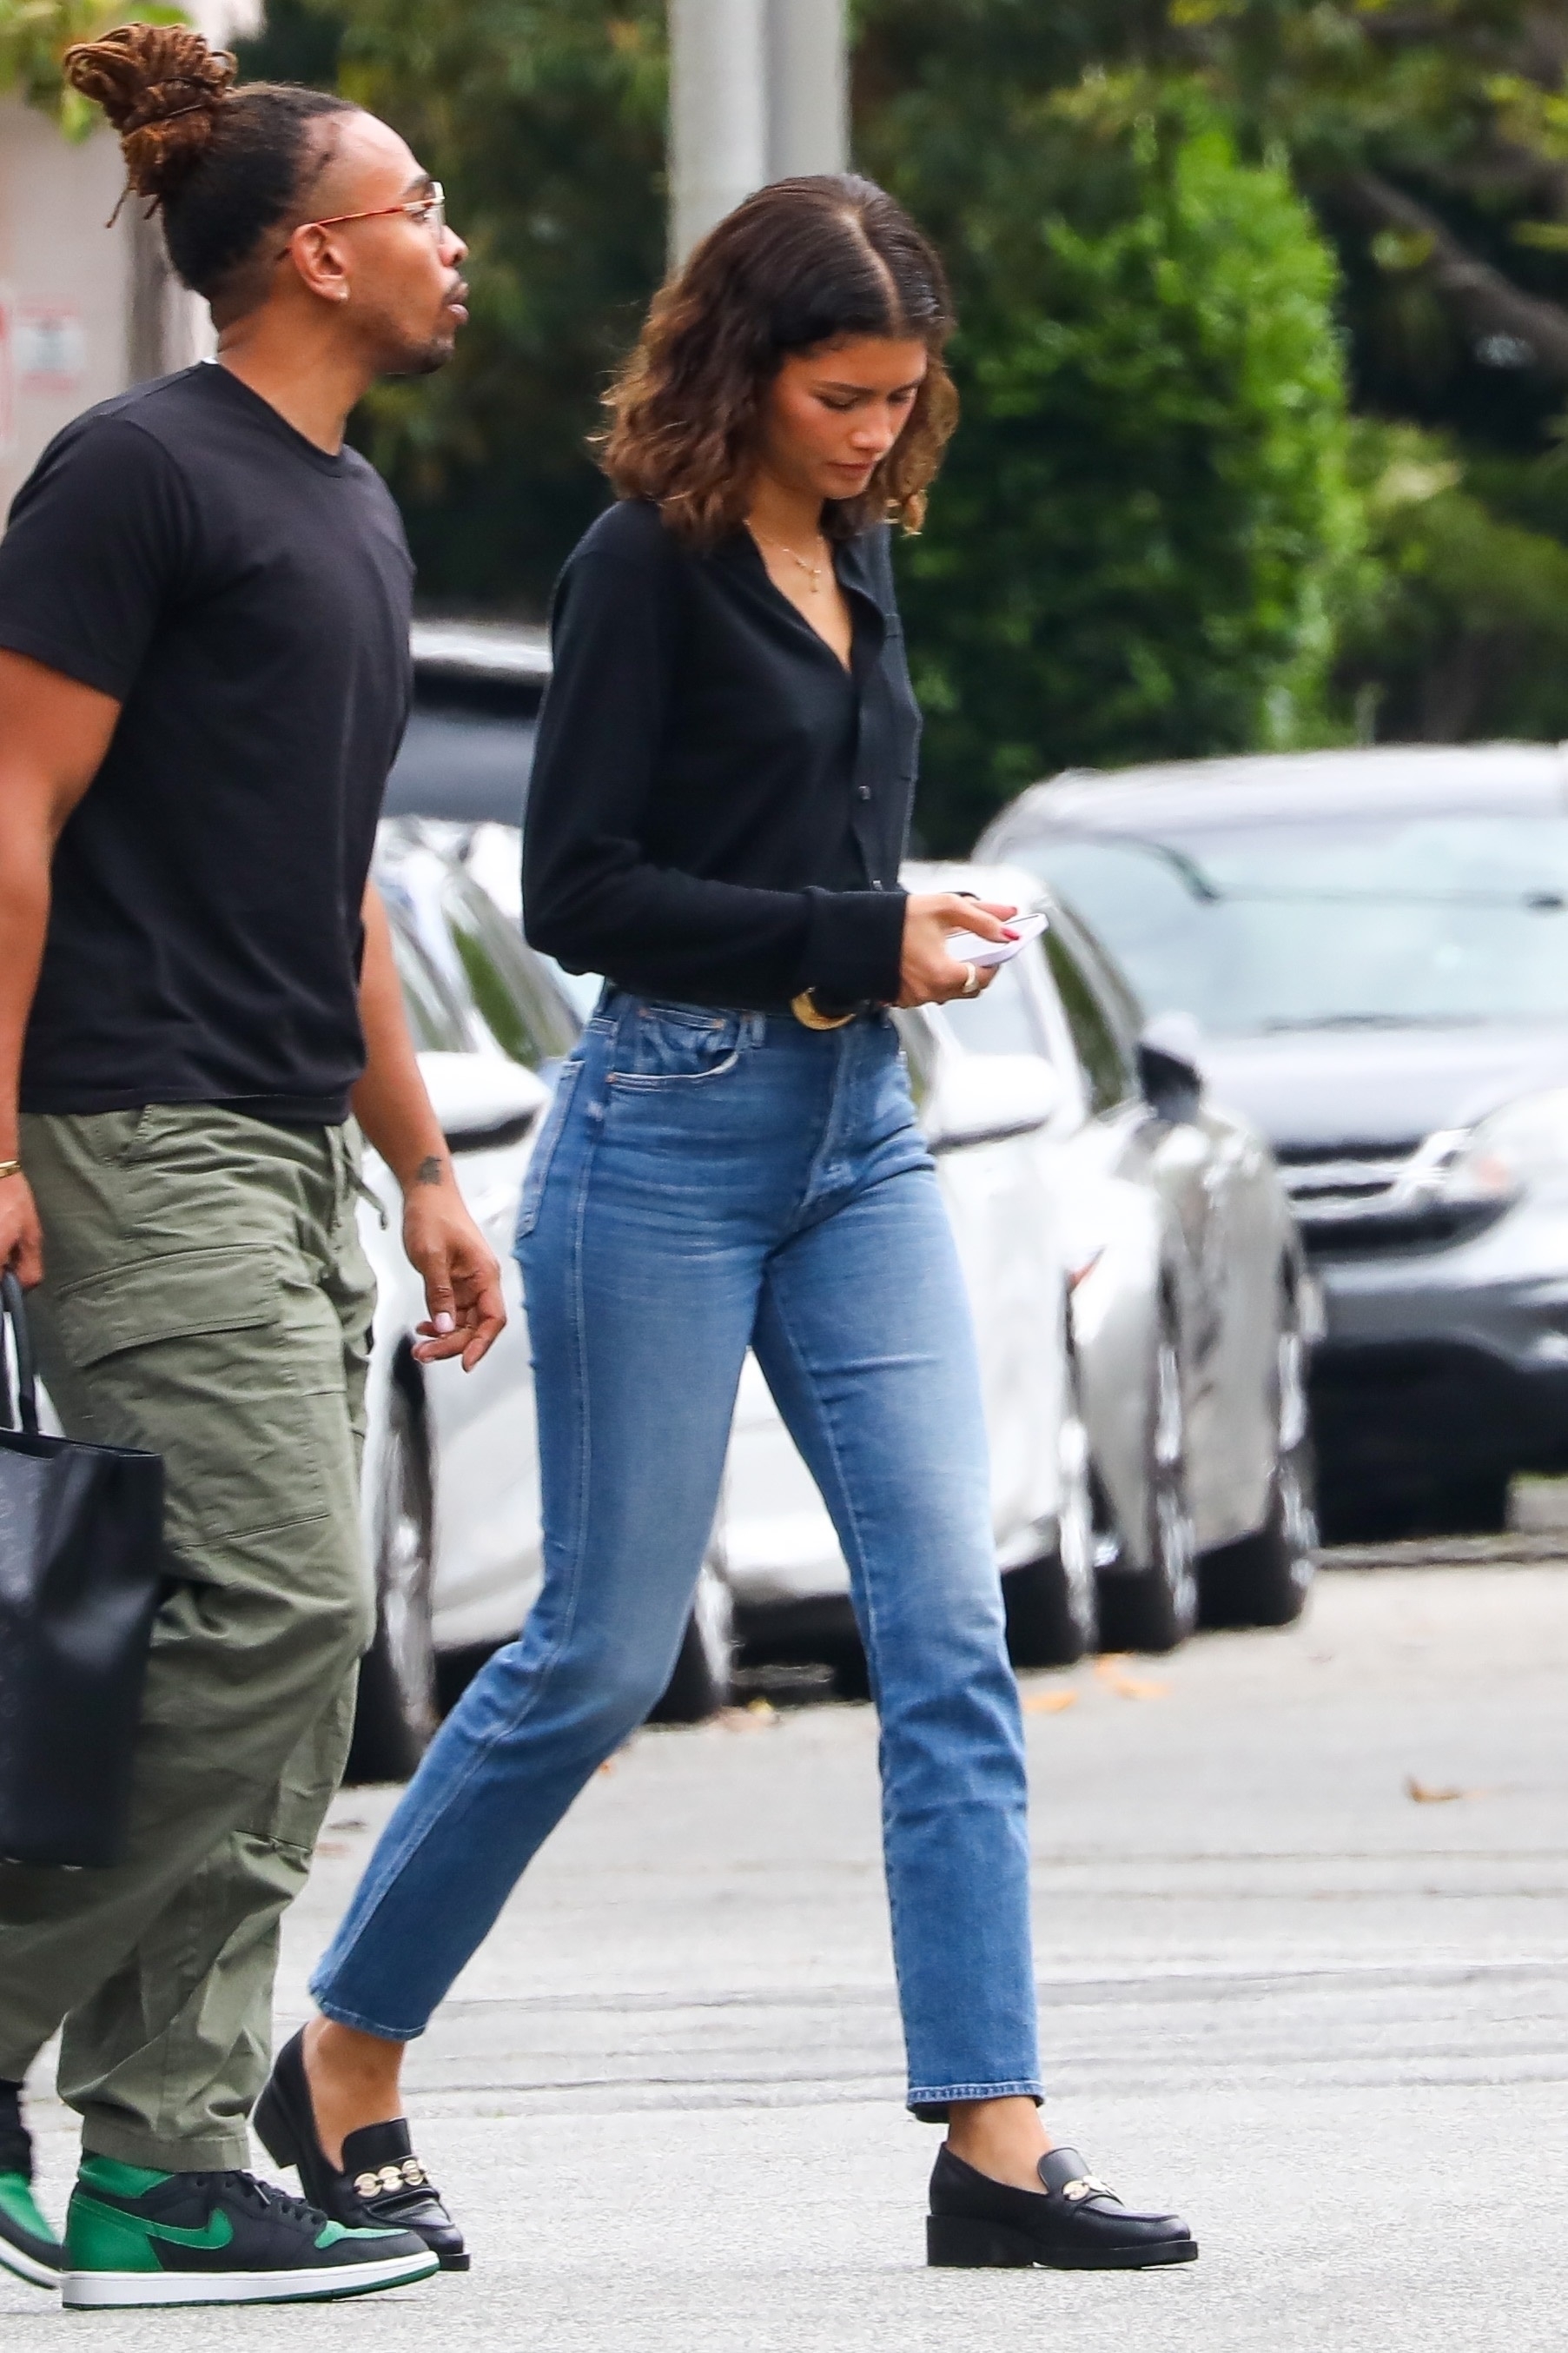 zendaya wearing skinny jeans and loafers